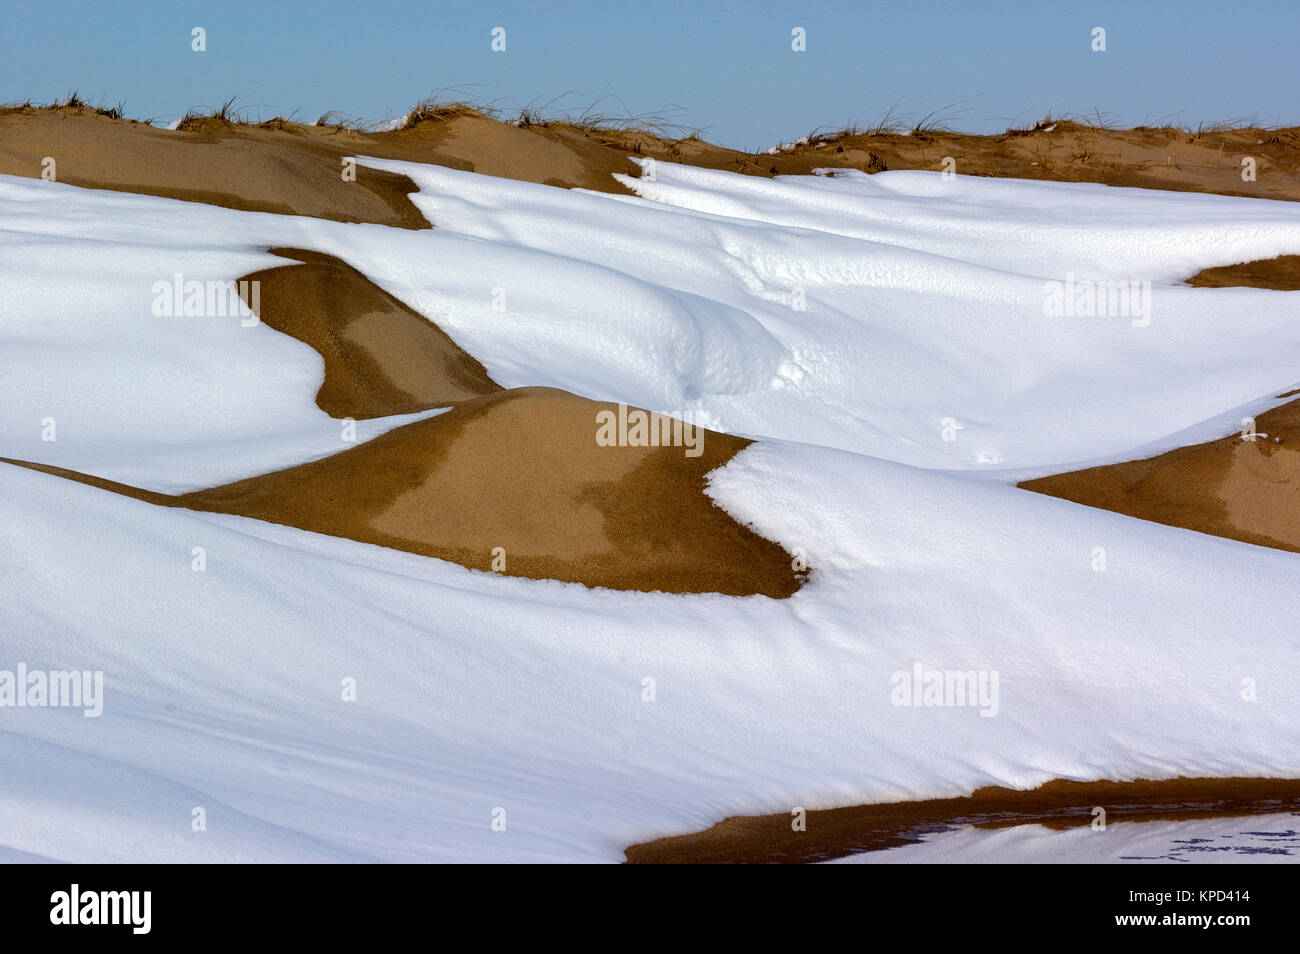 Snow capped sand dunes and fence in Provincetown, Massachusetts on Cape Cod, Cape Cod National Seashore, USA Stock Photo